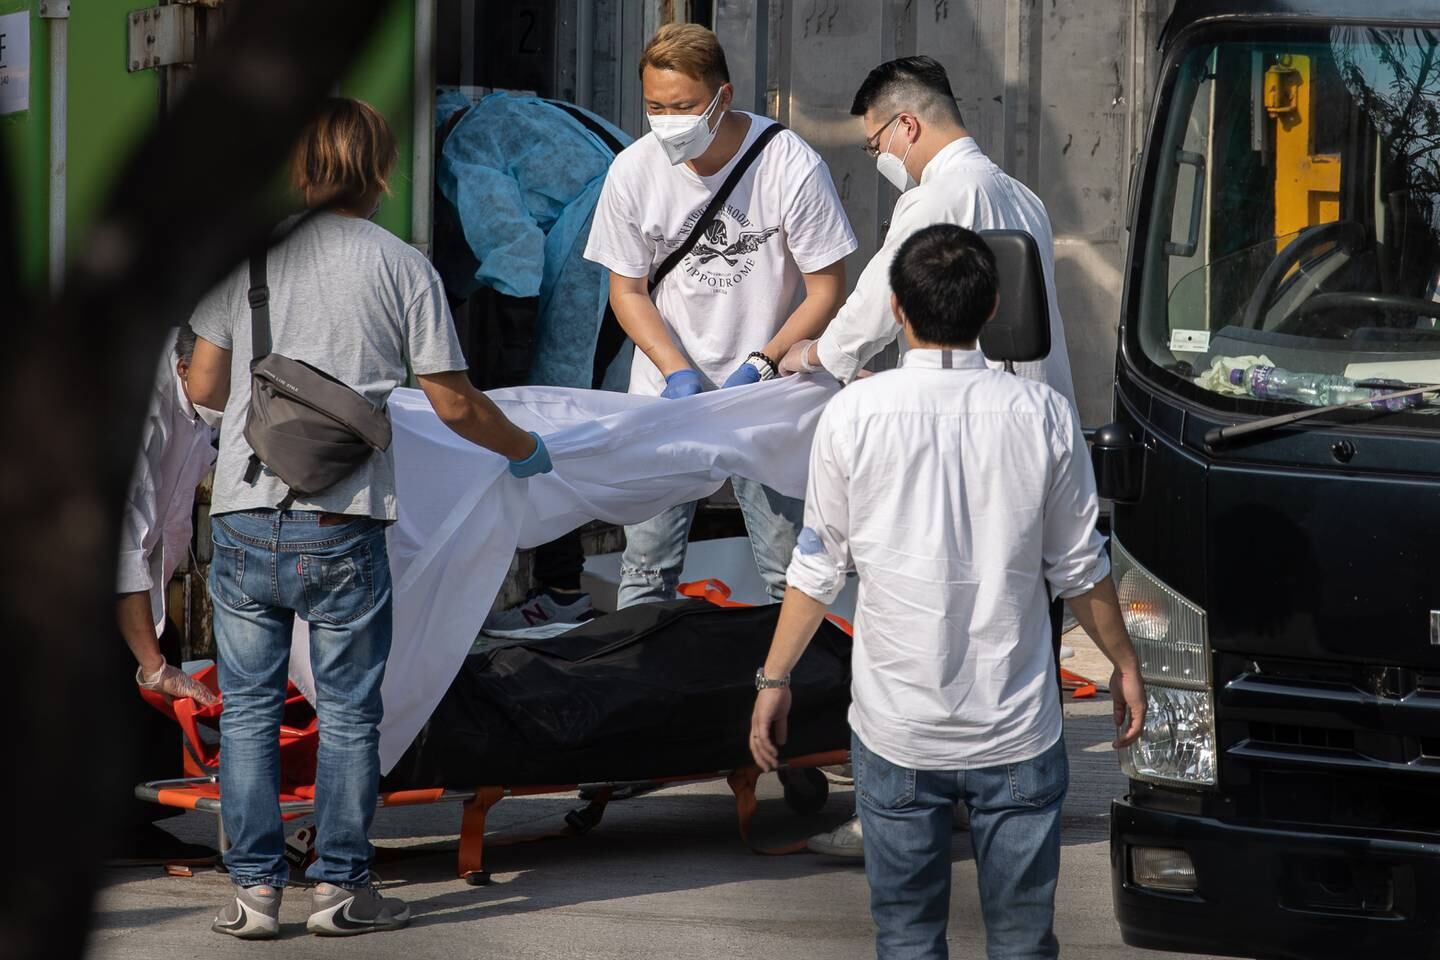 Workers move a body from a refrigerated shipping container into a hearse for cremation outside a public mortuary in Hong Kong. EPA